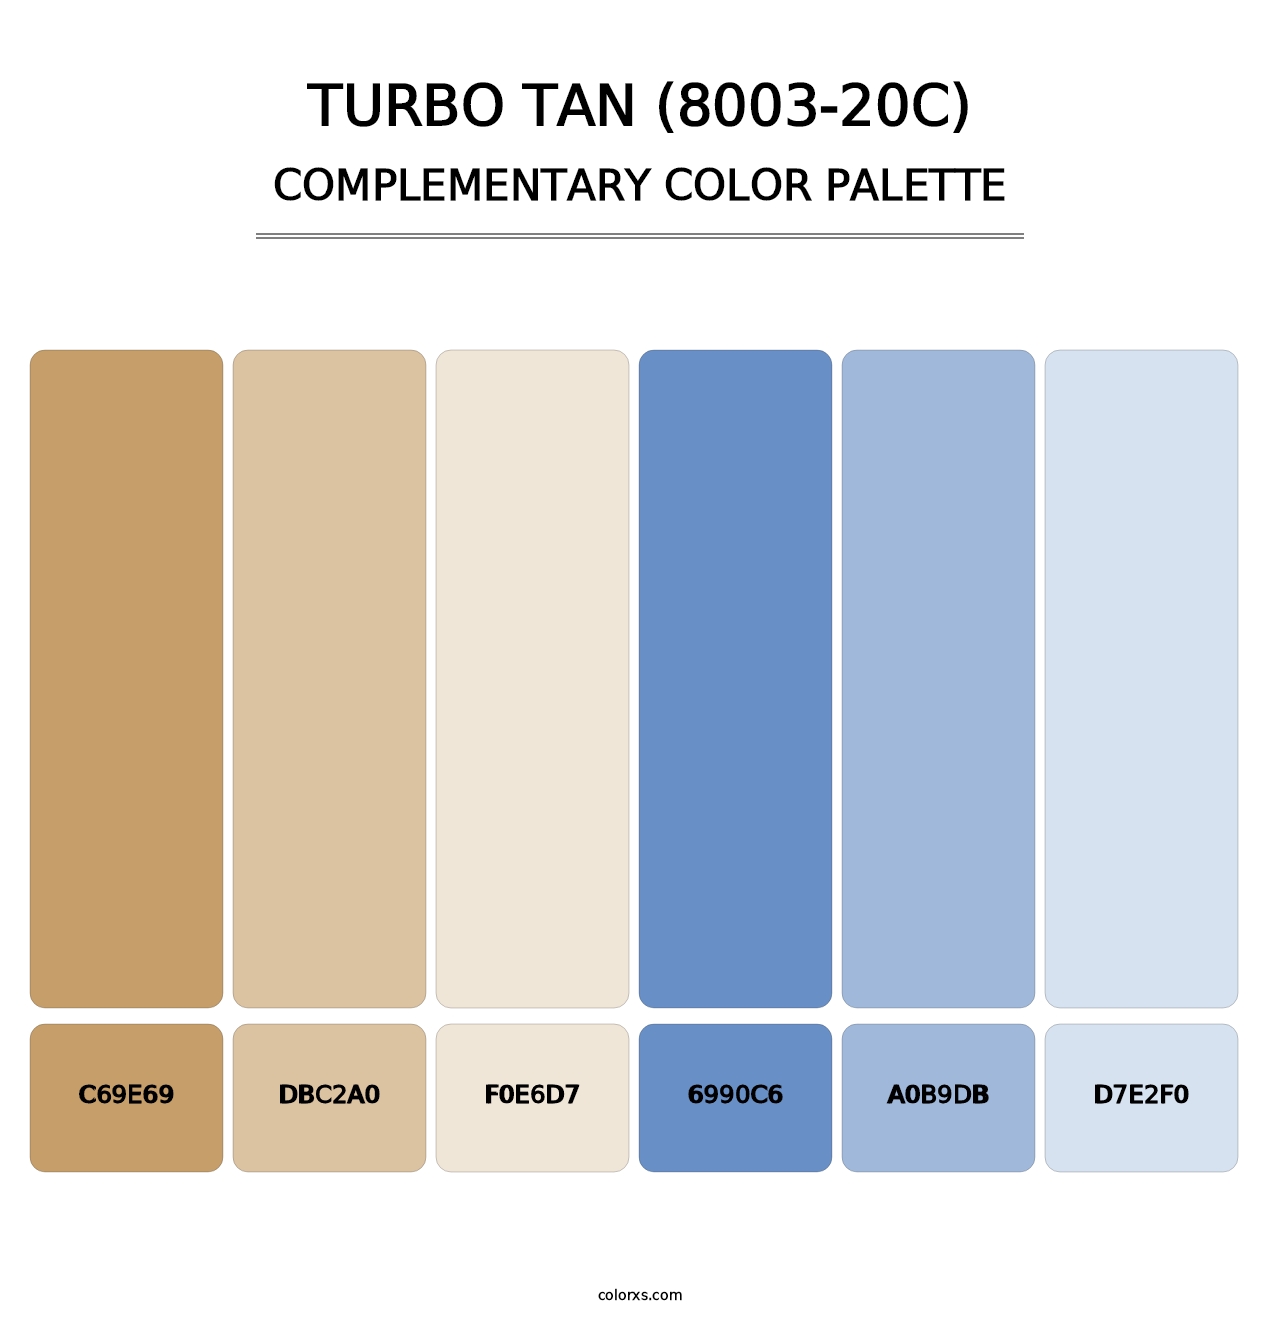 Turbo Tan (8003-20C) - Complementary Color Palette